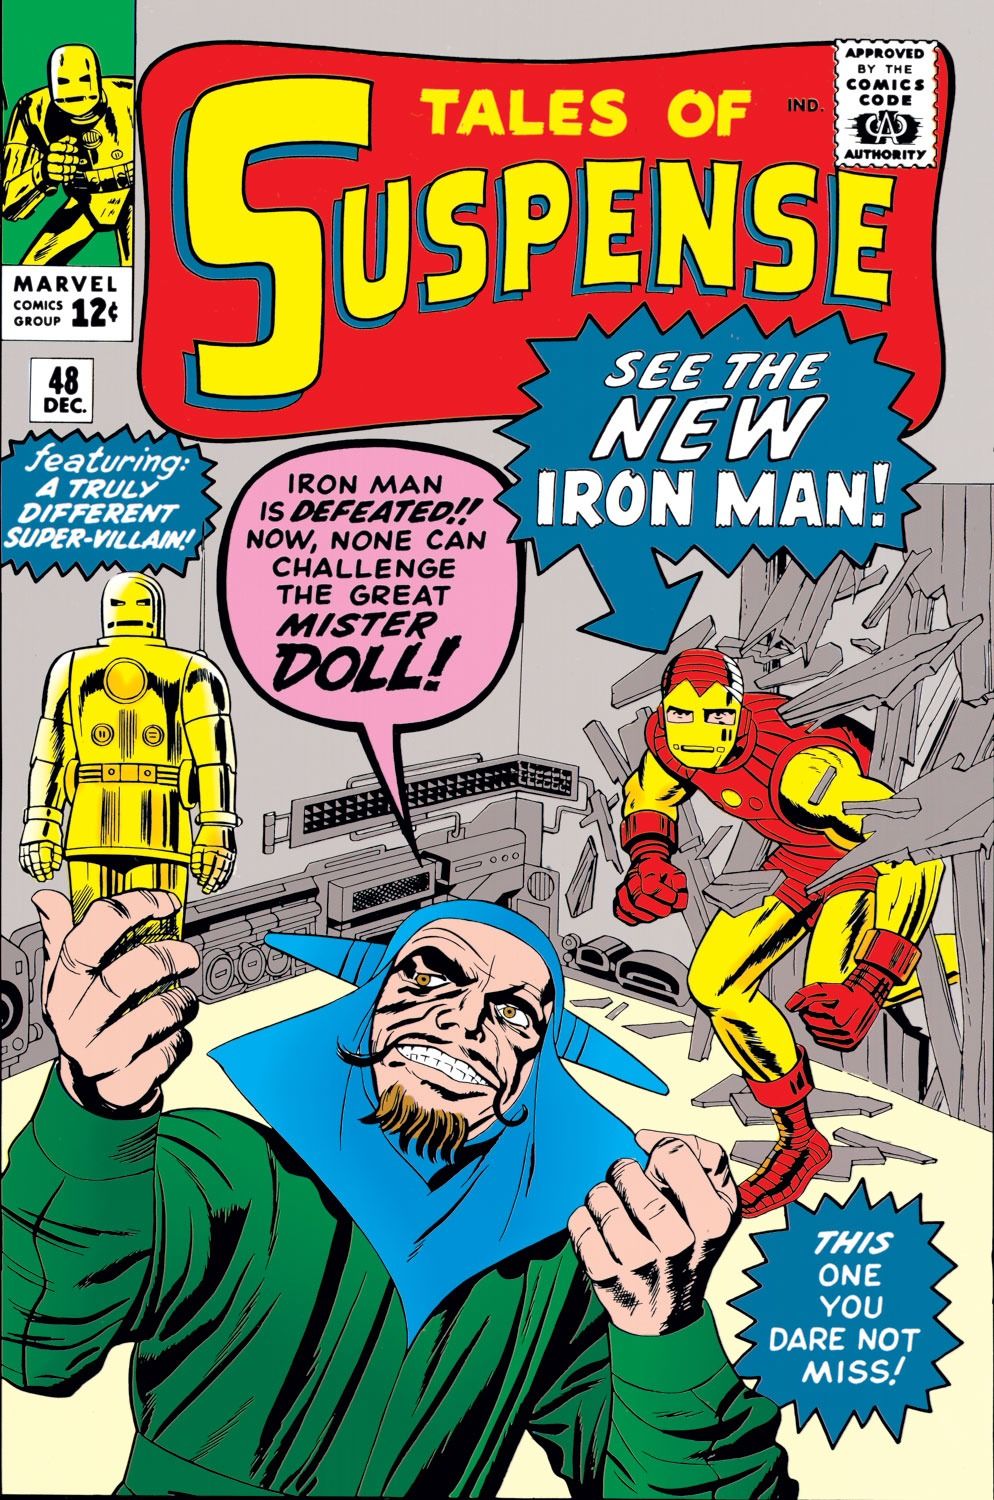 The cover of Tales of Suspense